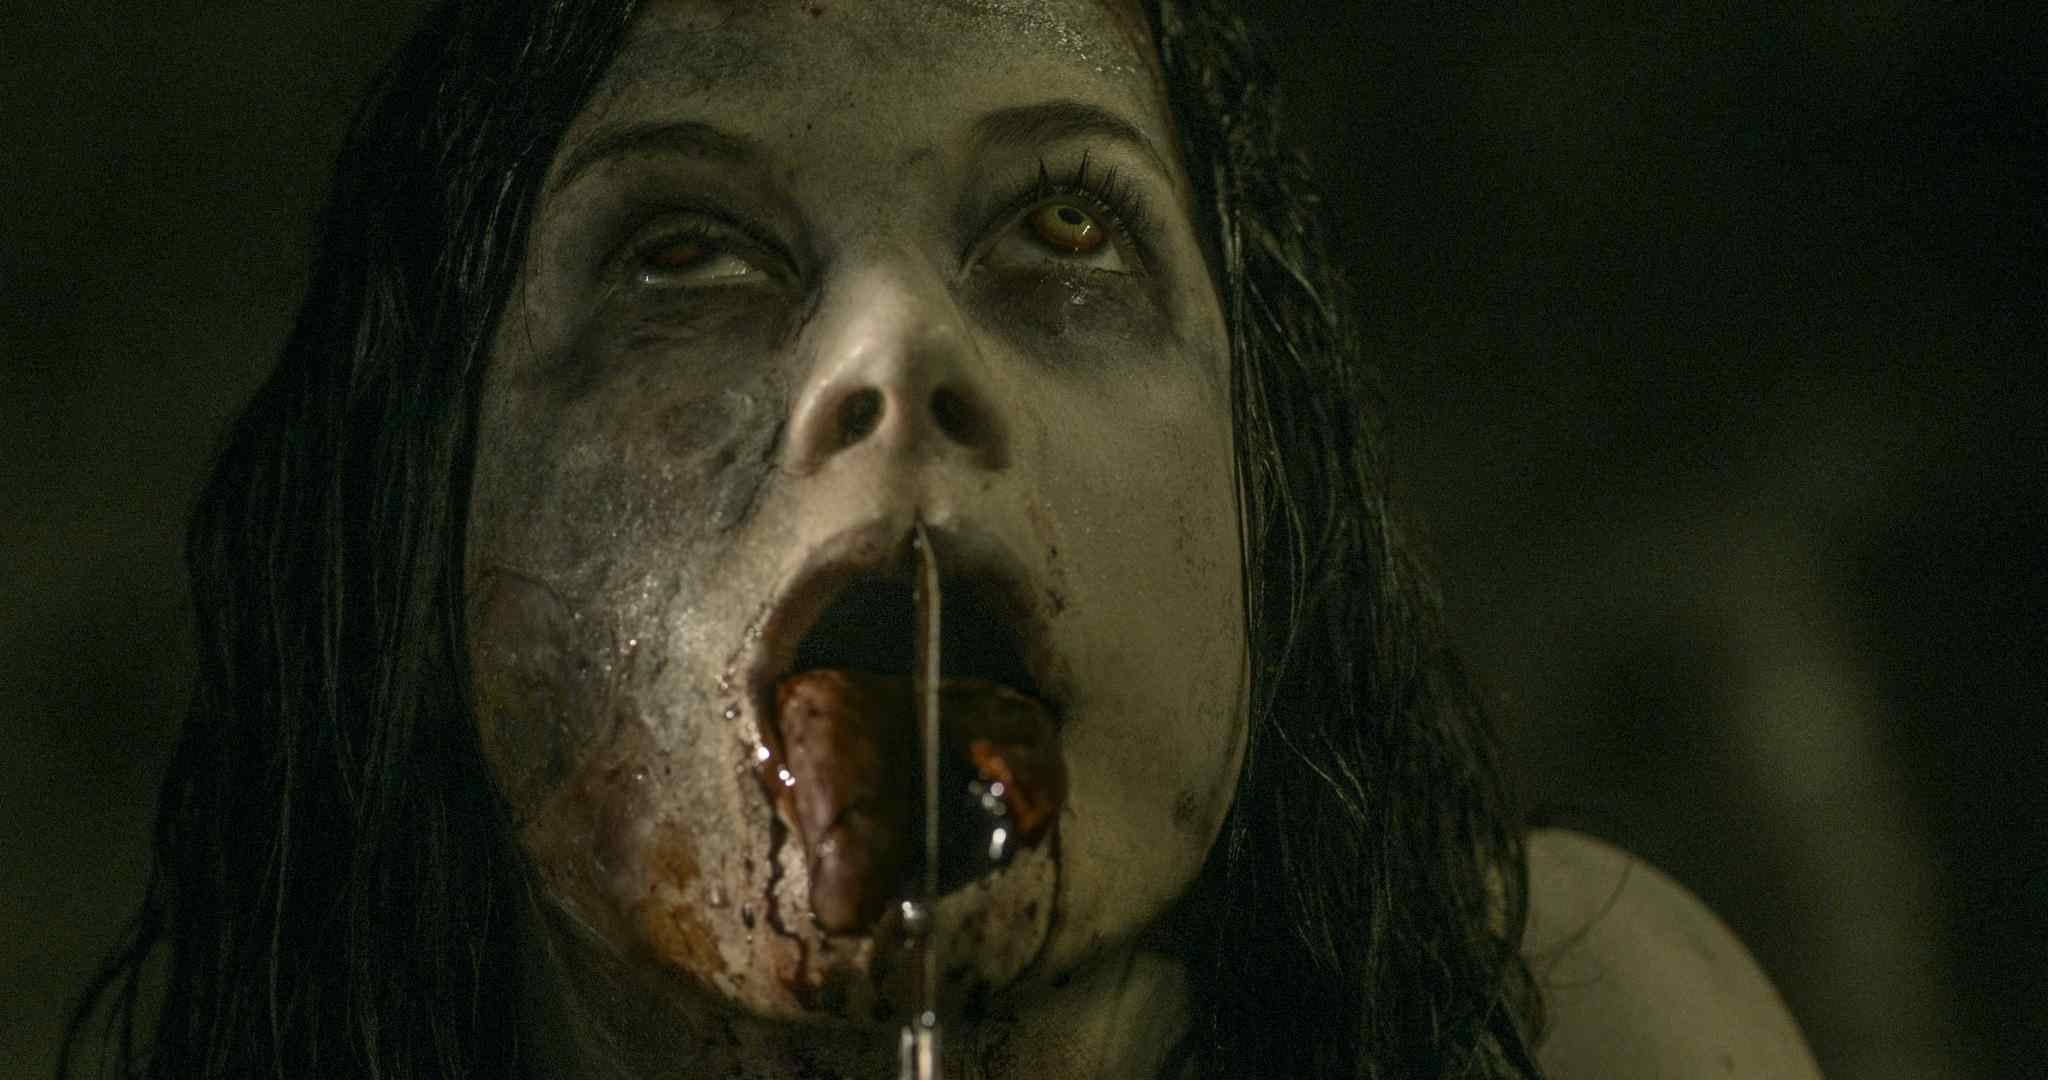 0 Google Evil BuzzMachine Heres Exactly What to Expect From the Unrated Evil Dead Remake